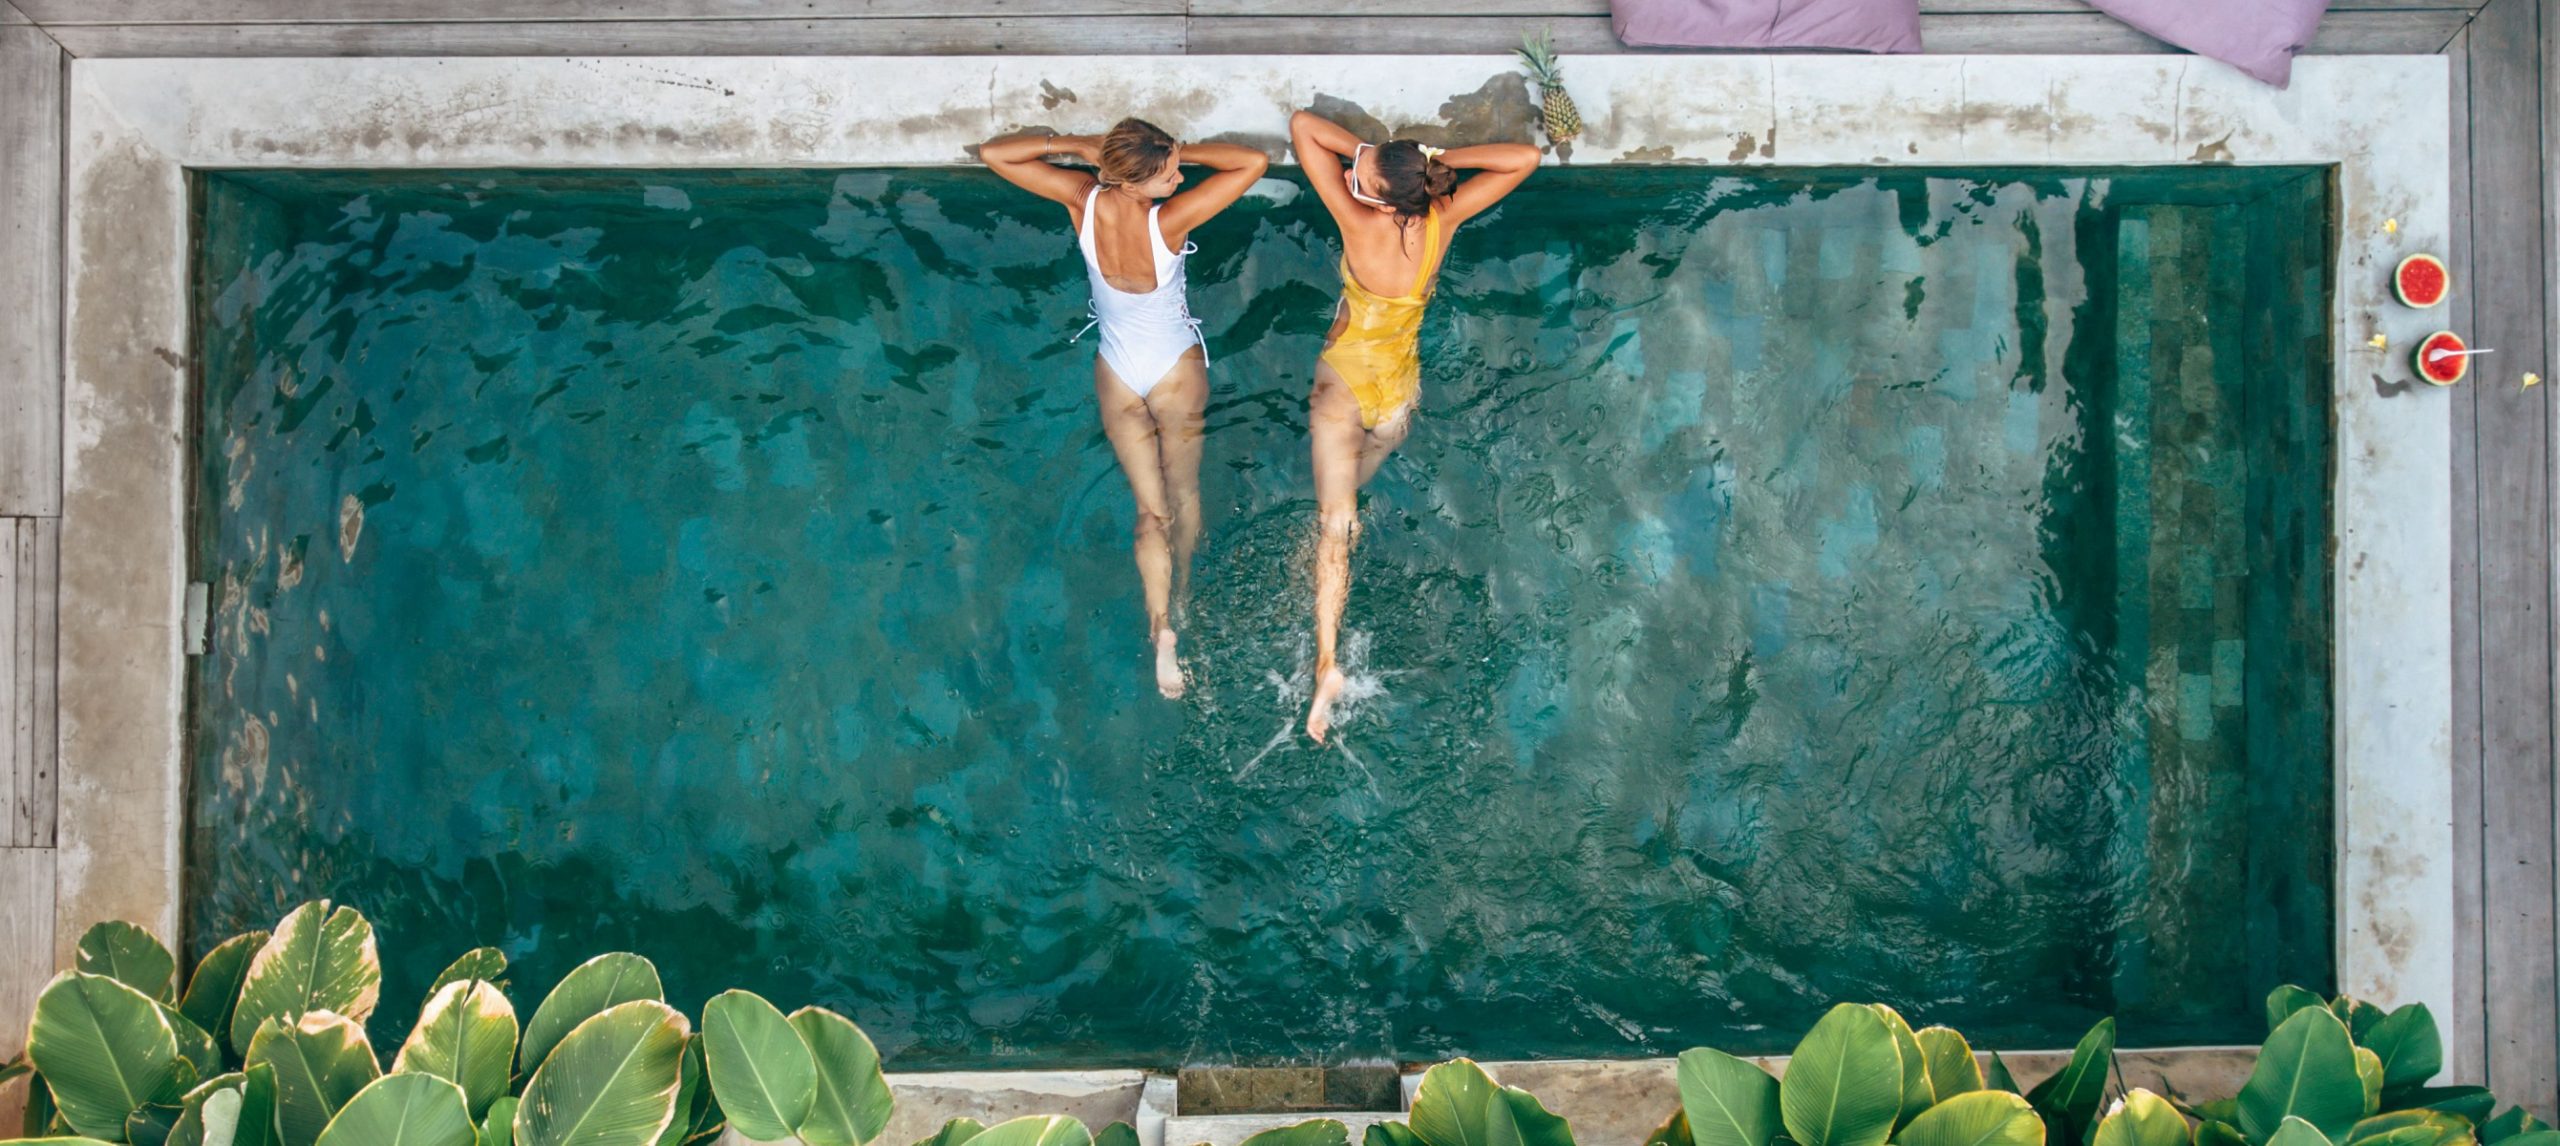 Two young woman talking inside a pool.